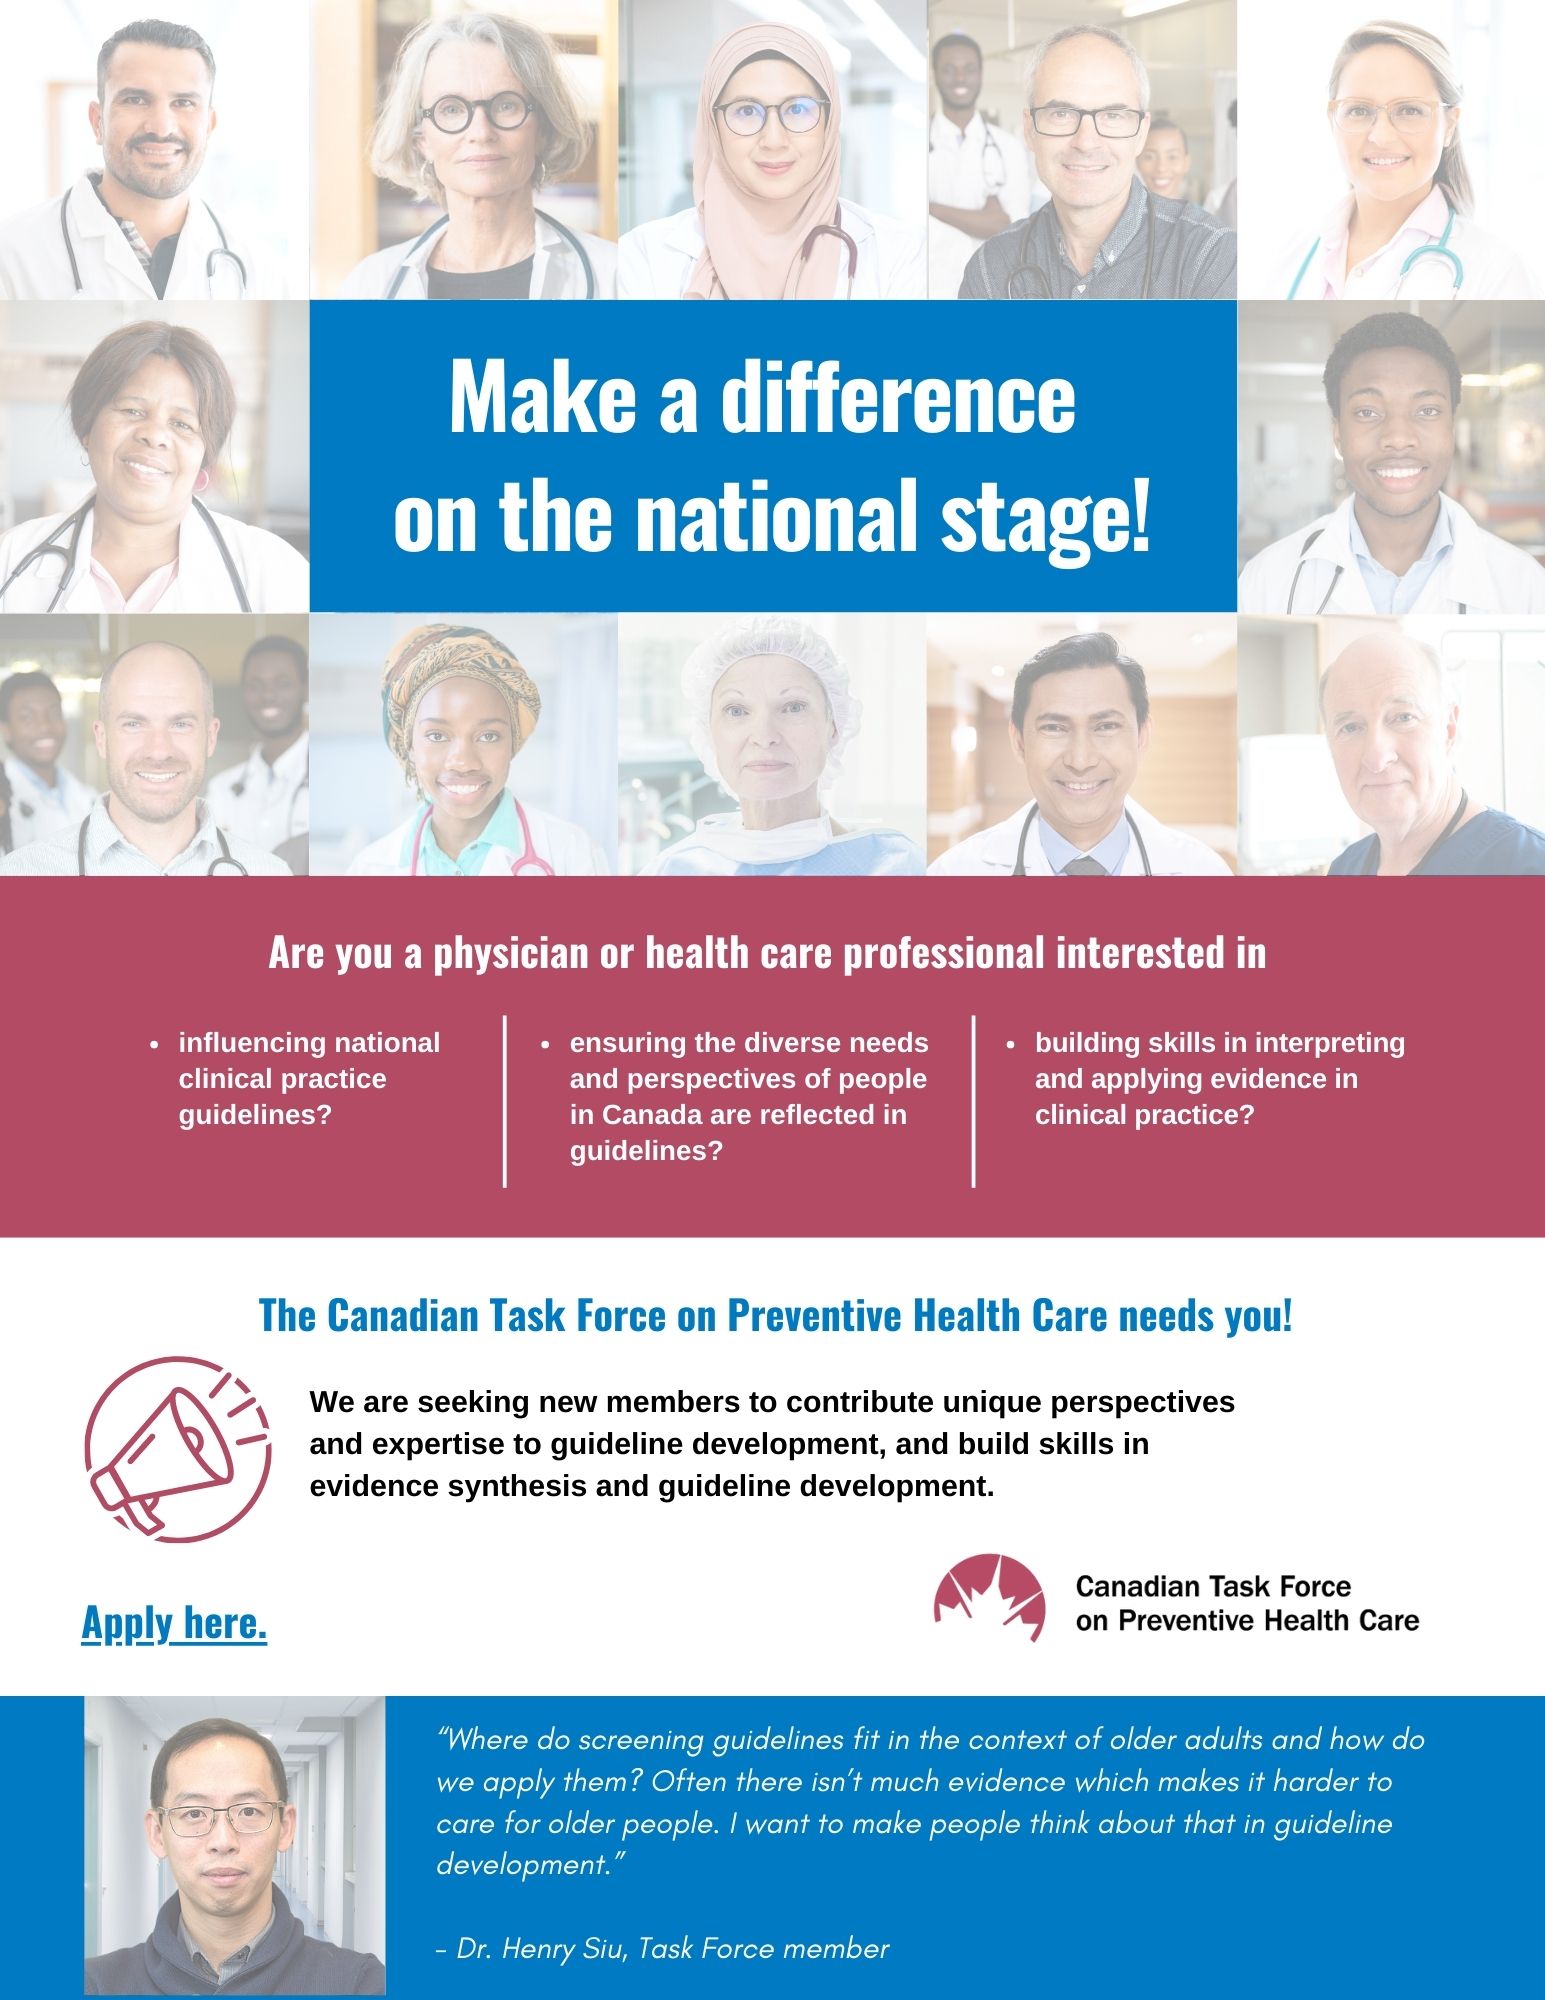 Make a difference on the national stage!